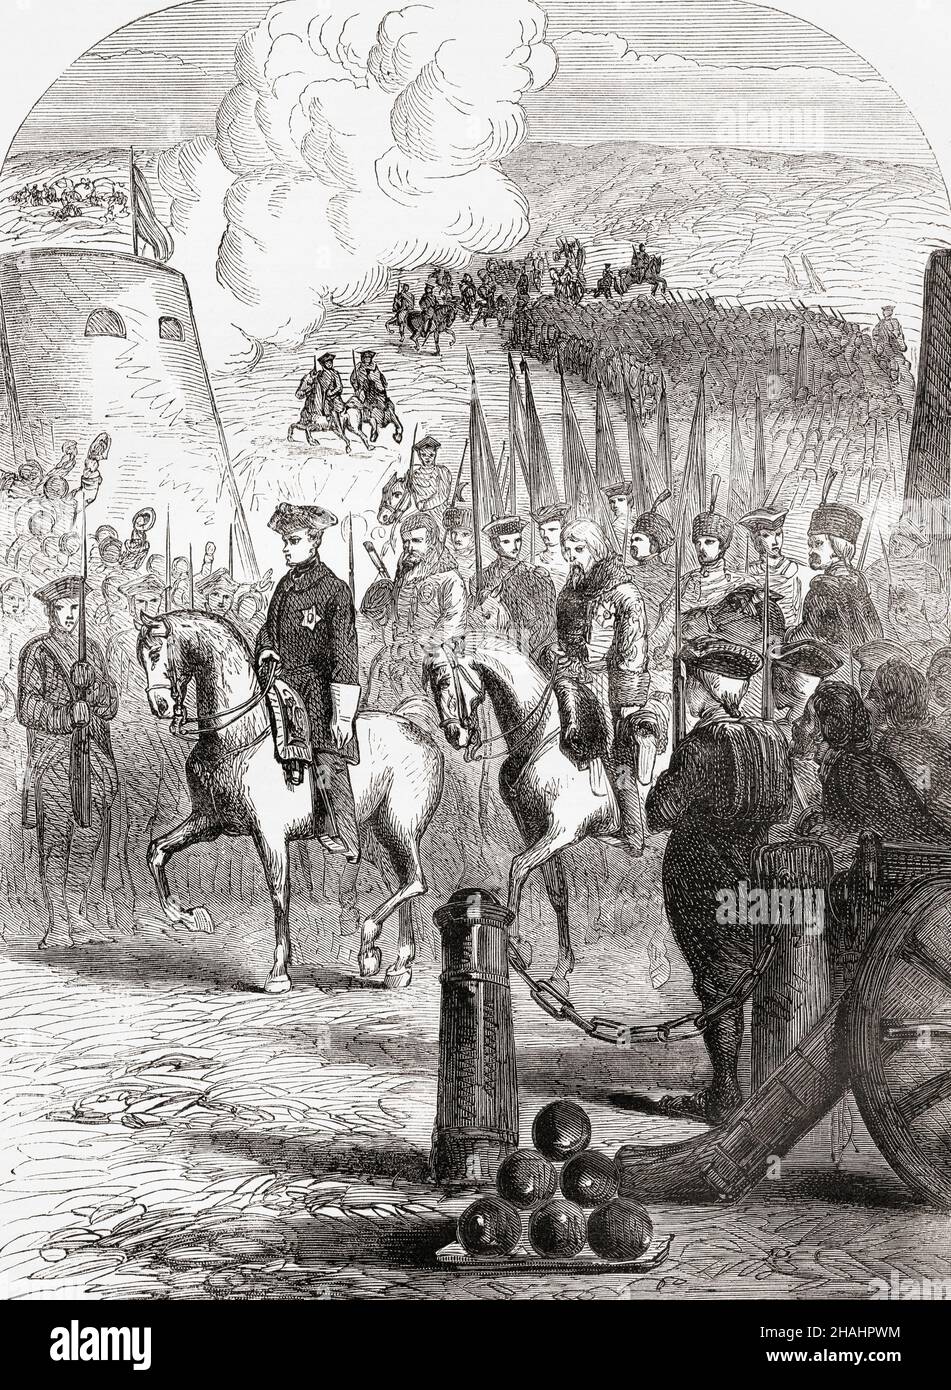 Charles XII of Sweden entering Copenhagen, 1700 during The Great Northern War.  Charles XII, sometimes Carl XII or Carolus Rex, 1682 – 1718.  King of Sweden.  From Cassell's Illustrated History of England, published c.1890. Stock Photo